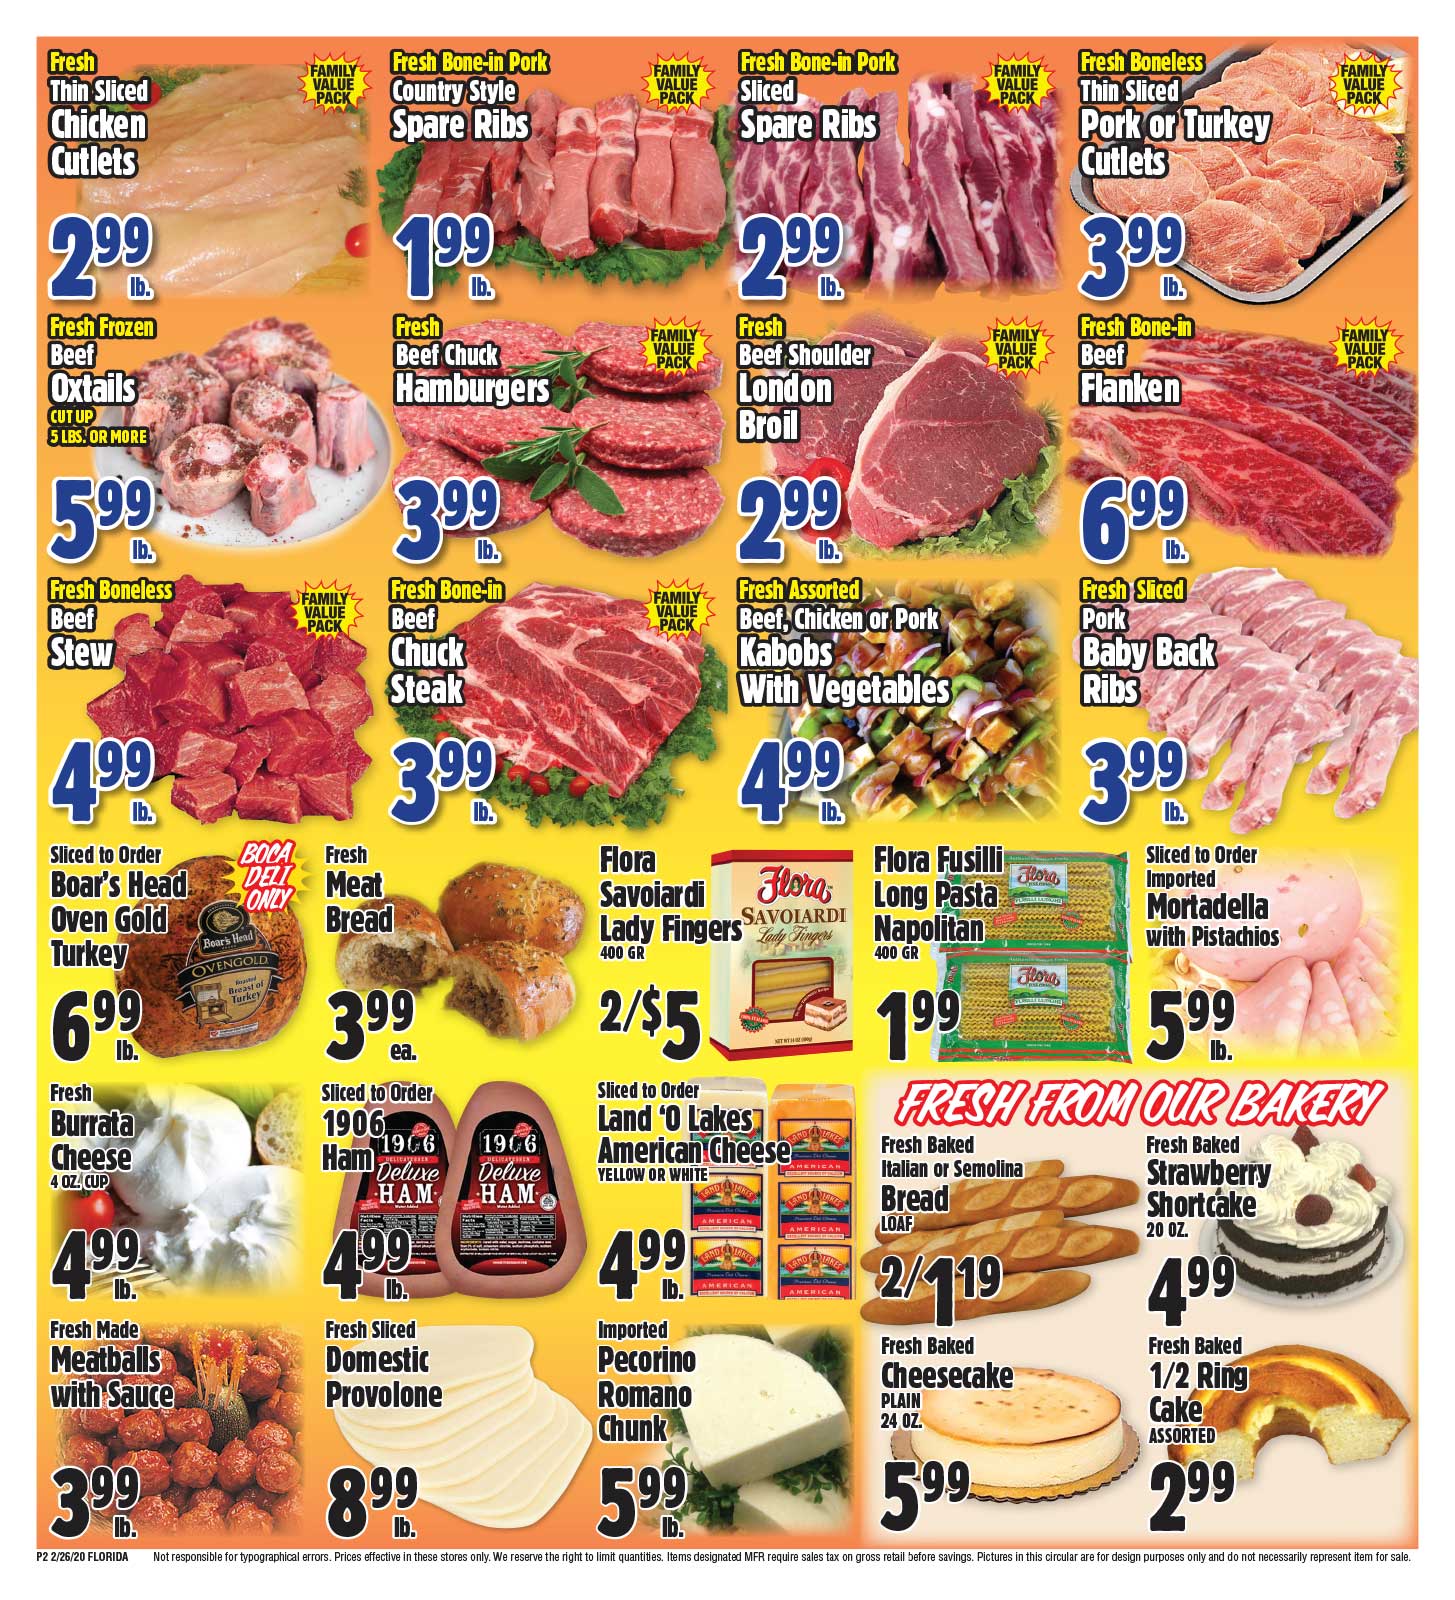 Western Beef Current weekly ad 02/26 - 03/03/2020 [2] - frequent-ads.com